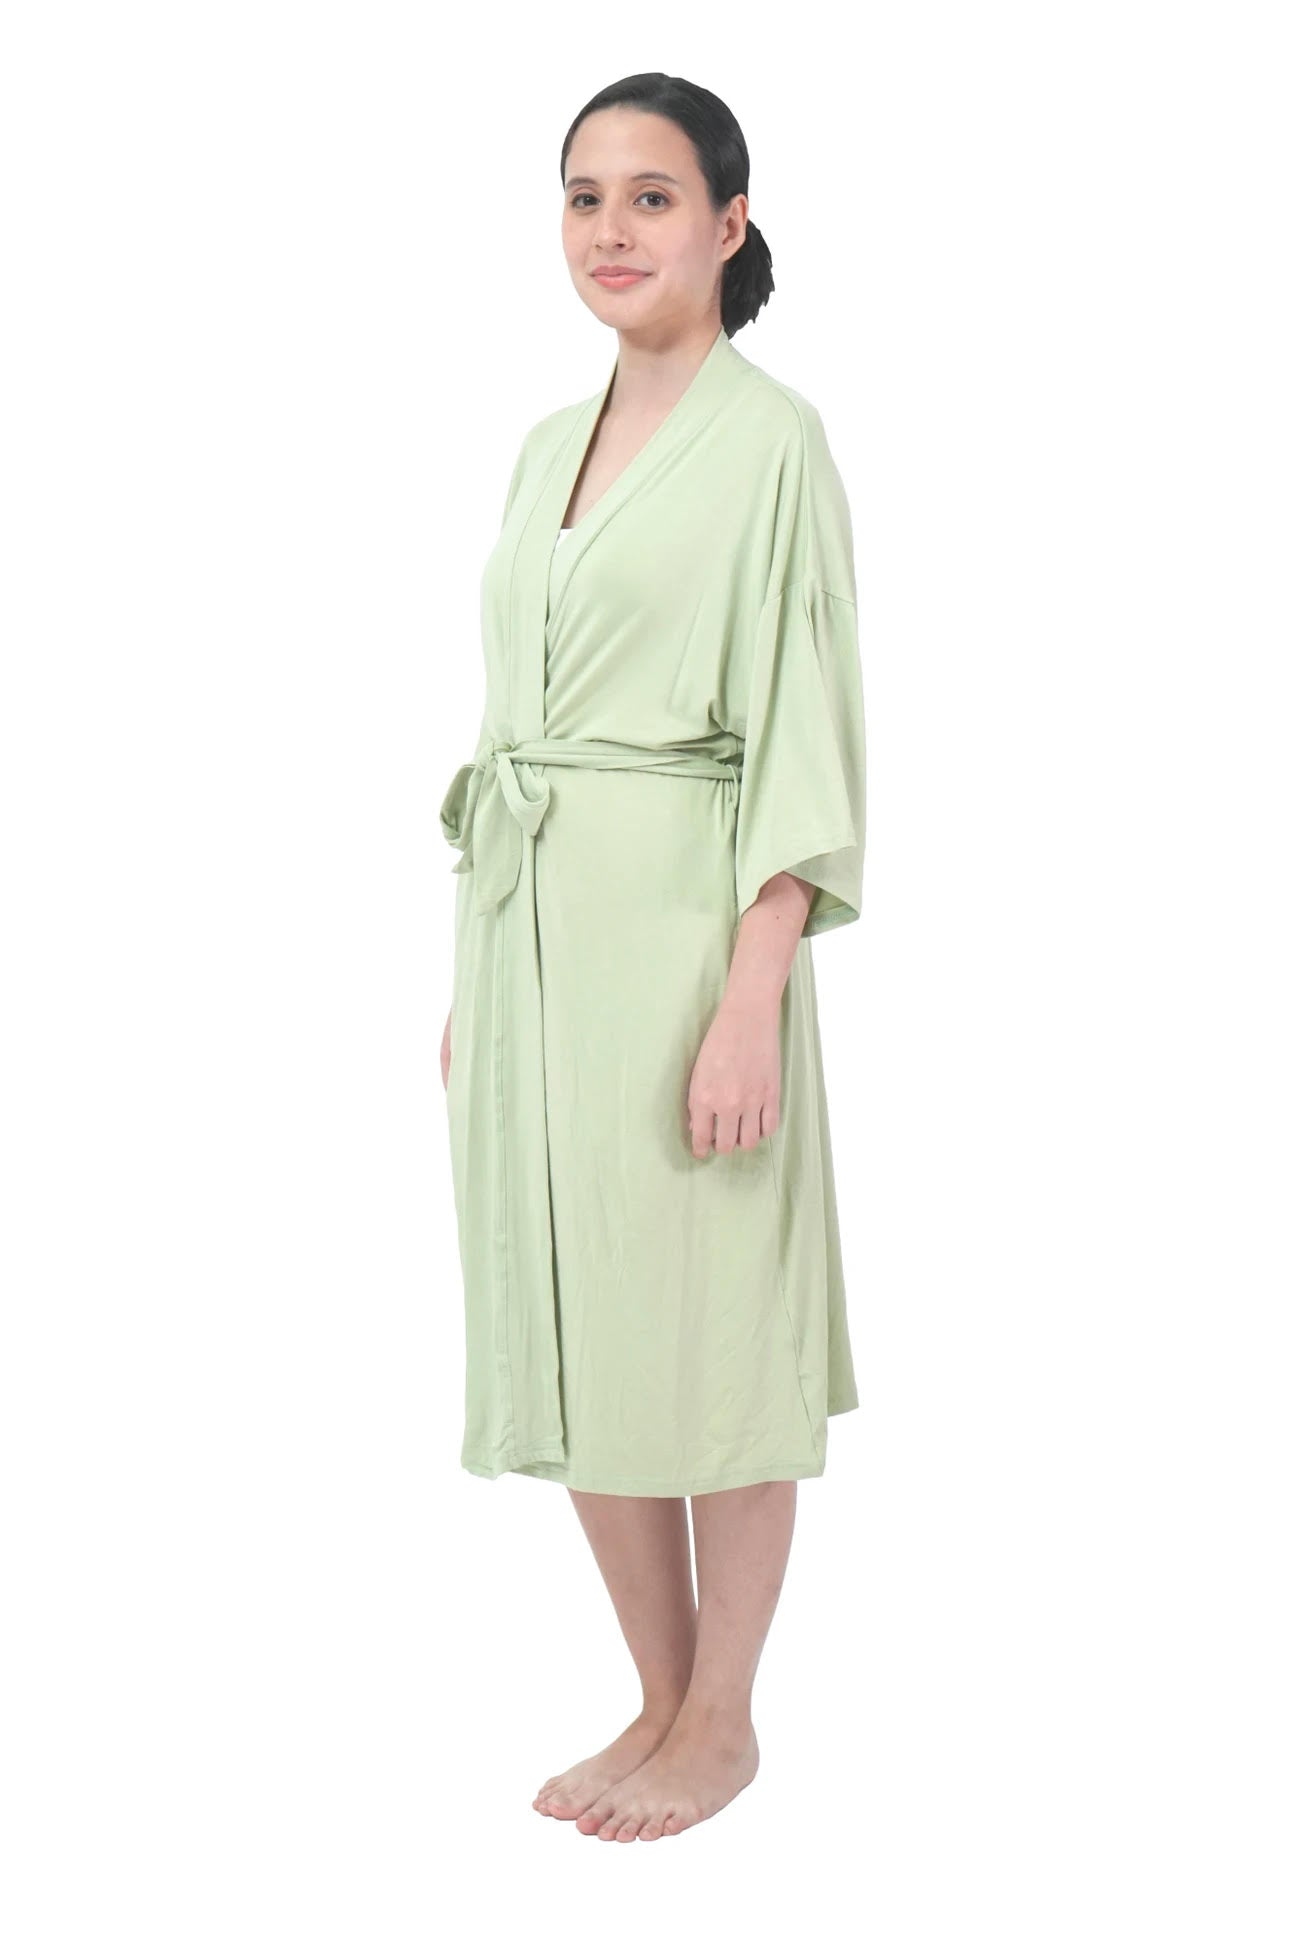 Bamberry - Mommy Robe (4507010793506)